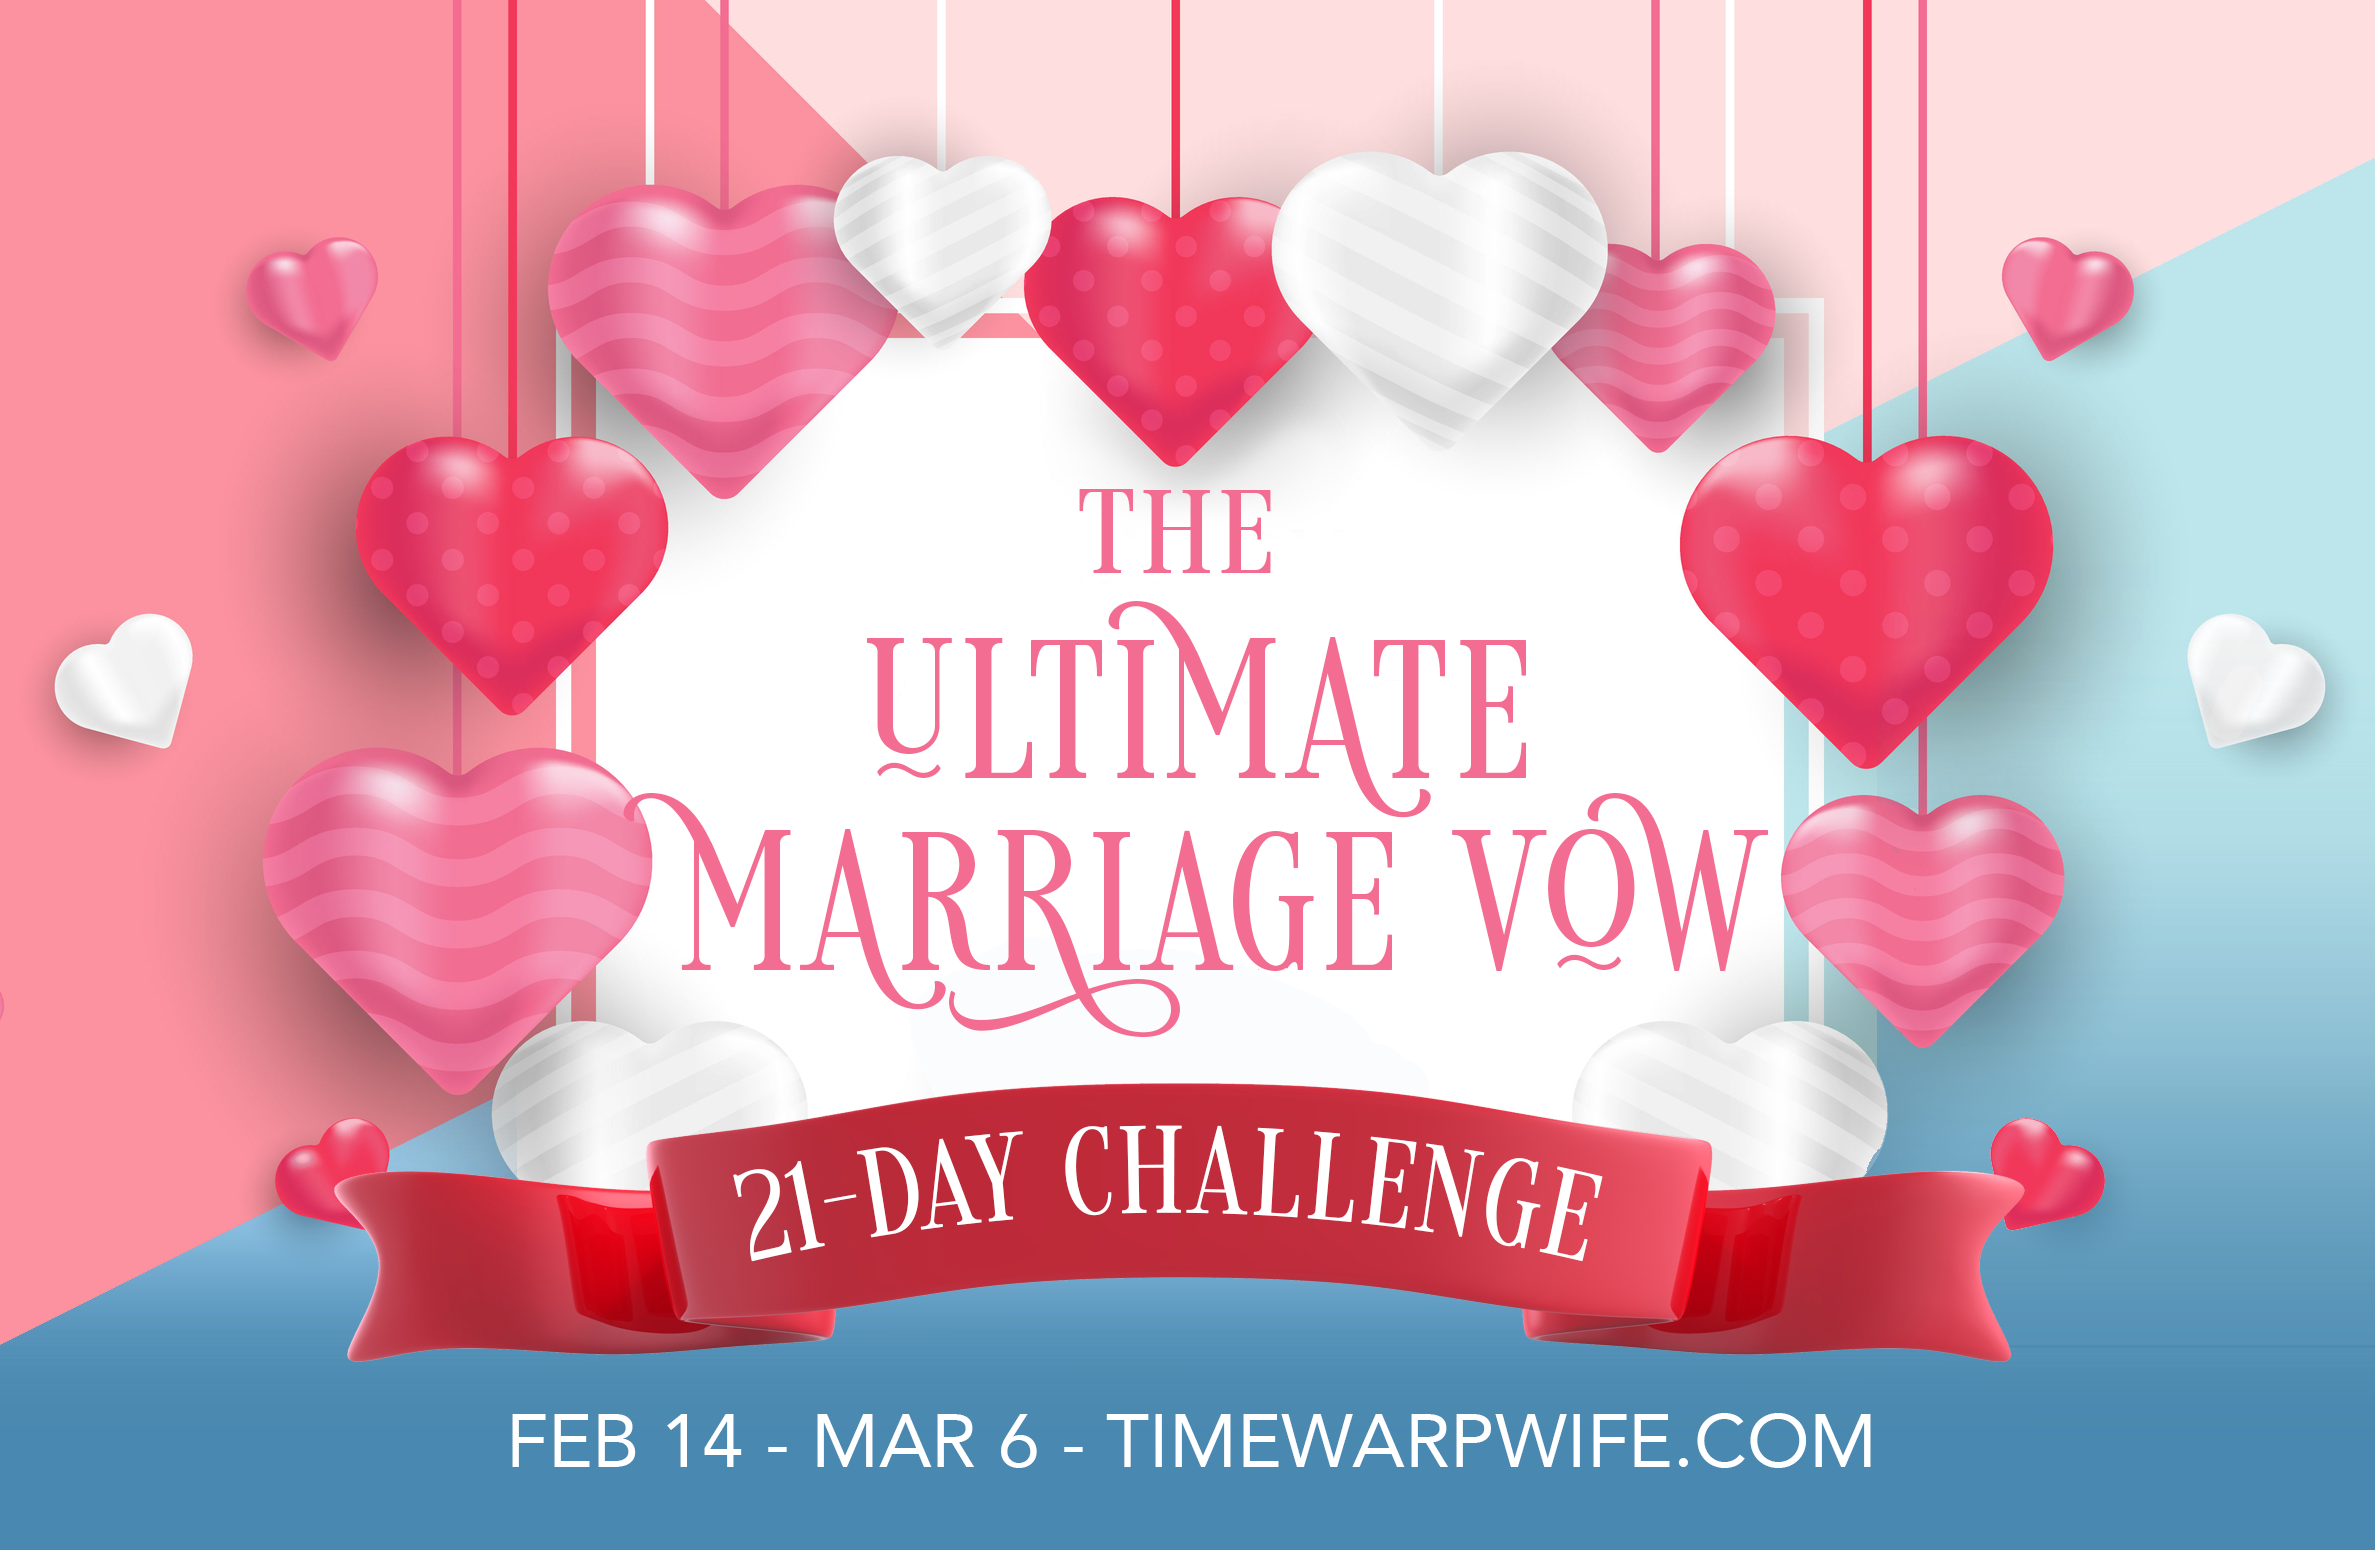 Take the 21-Day Marriage Challenge!